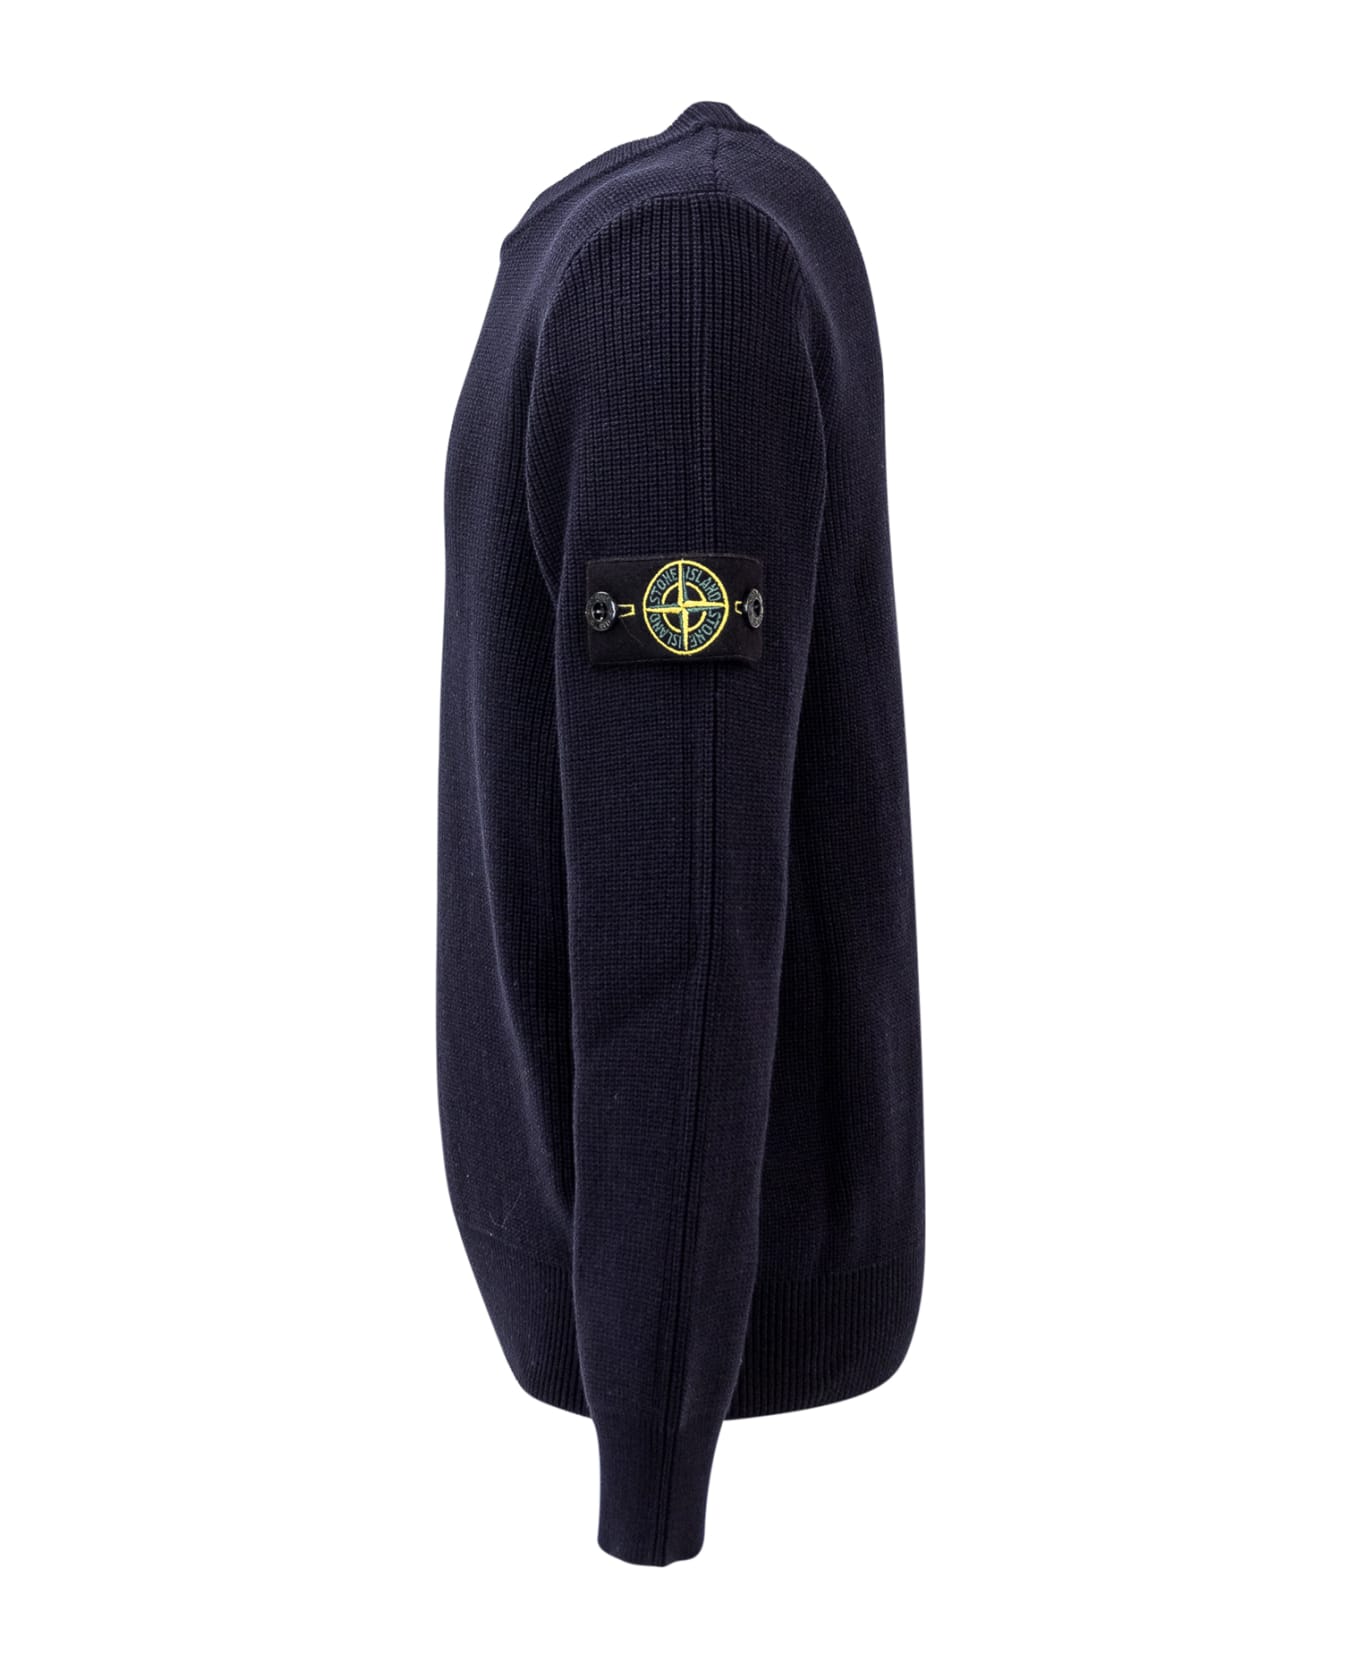 Stone Island Junior Pullover With Logo - NAVY BLUE